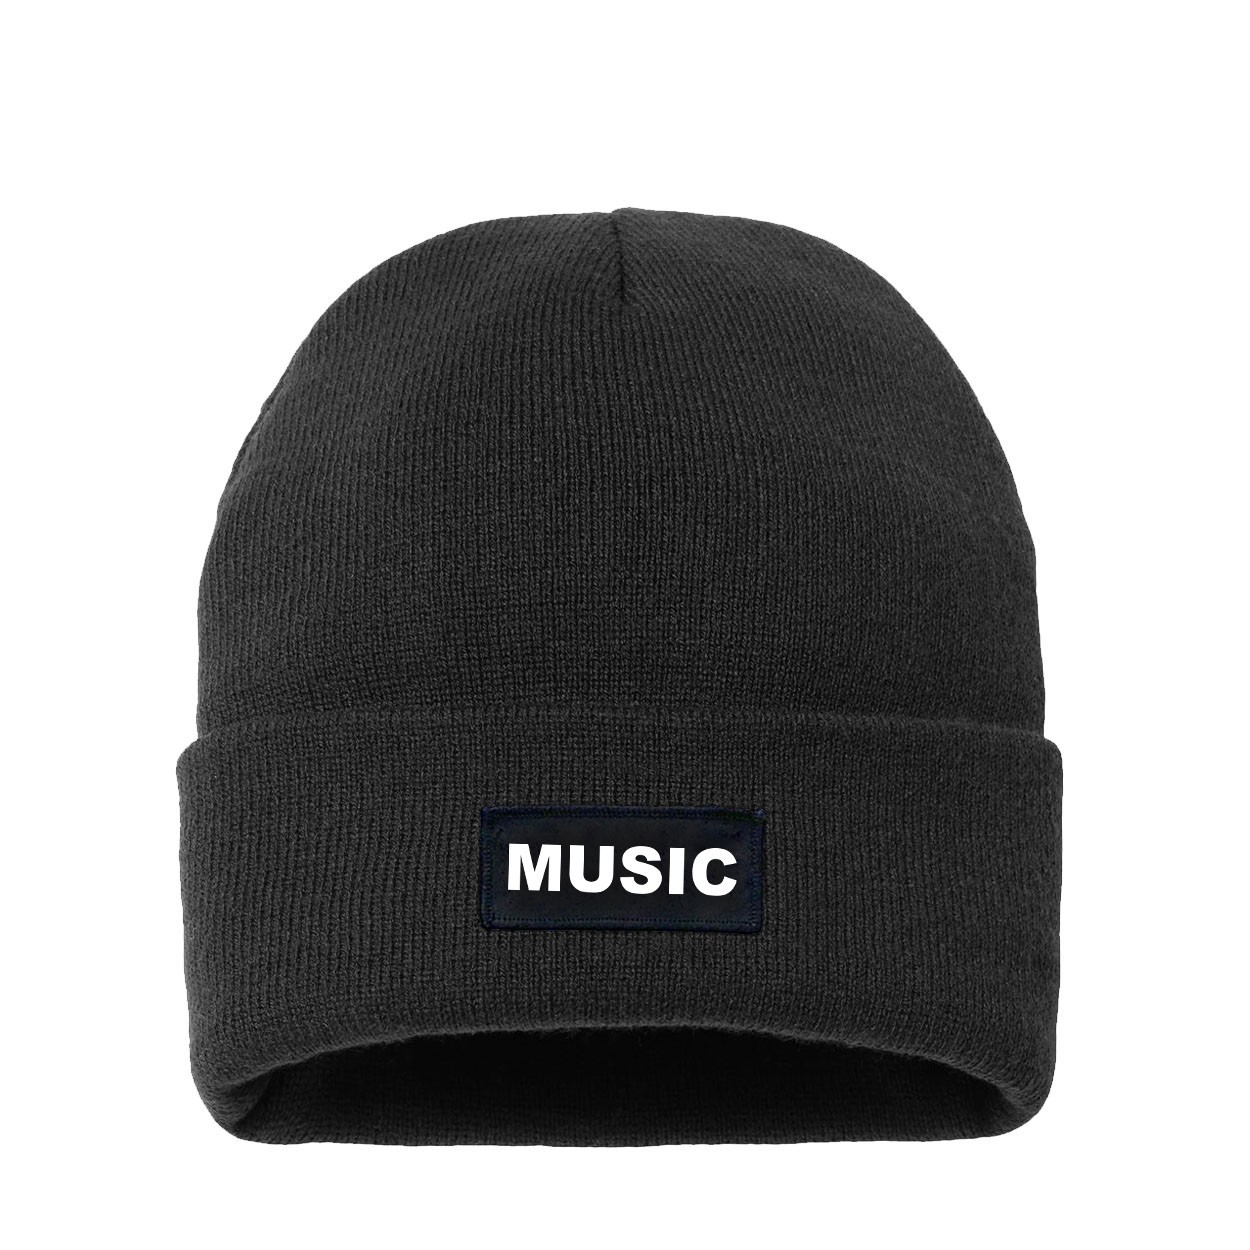 Music Brand Logo Night Out Woven Patch Night Out Sherpa Lined Cuffed Beanie Black